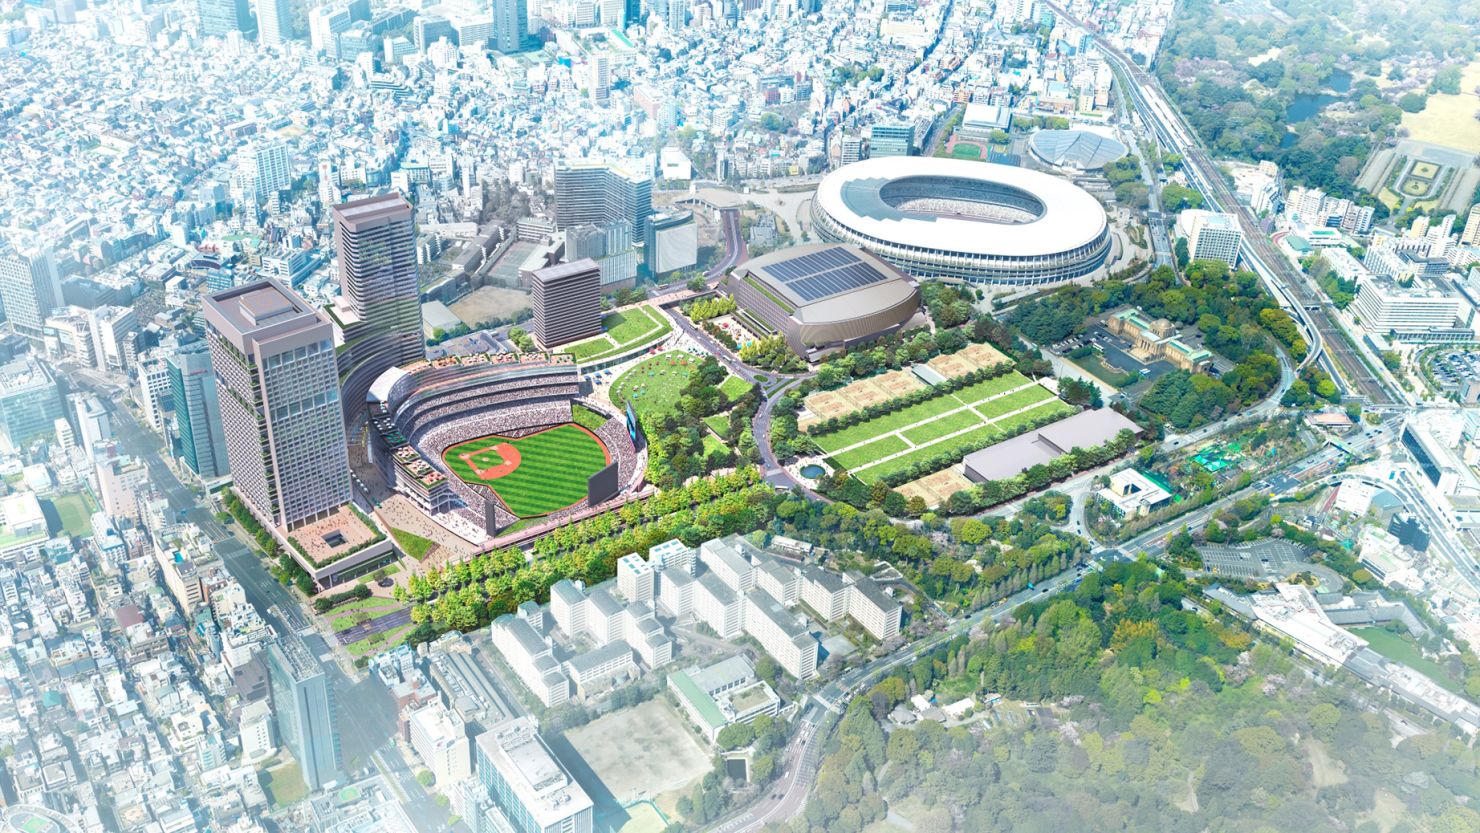 A digital rendering shows the proposed Jingu Gaien District Urban Redevelopment Project, which is set to complete in 2036.